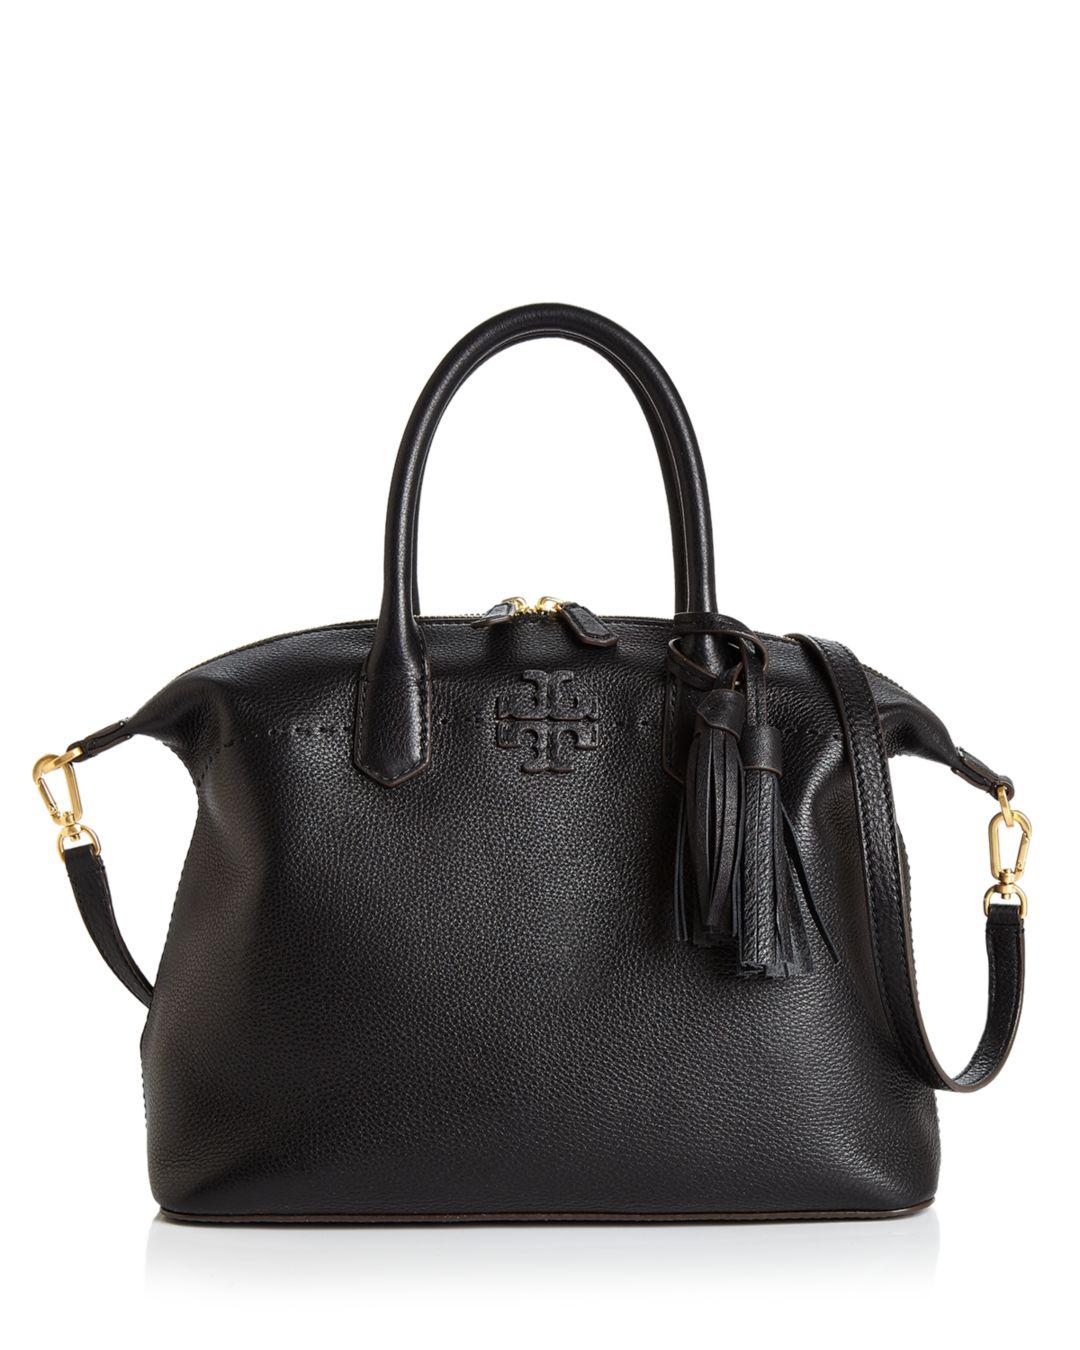 Lyst - Tory Burch Mcgraw Slouchy Leather Satchel in Black